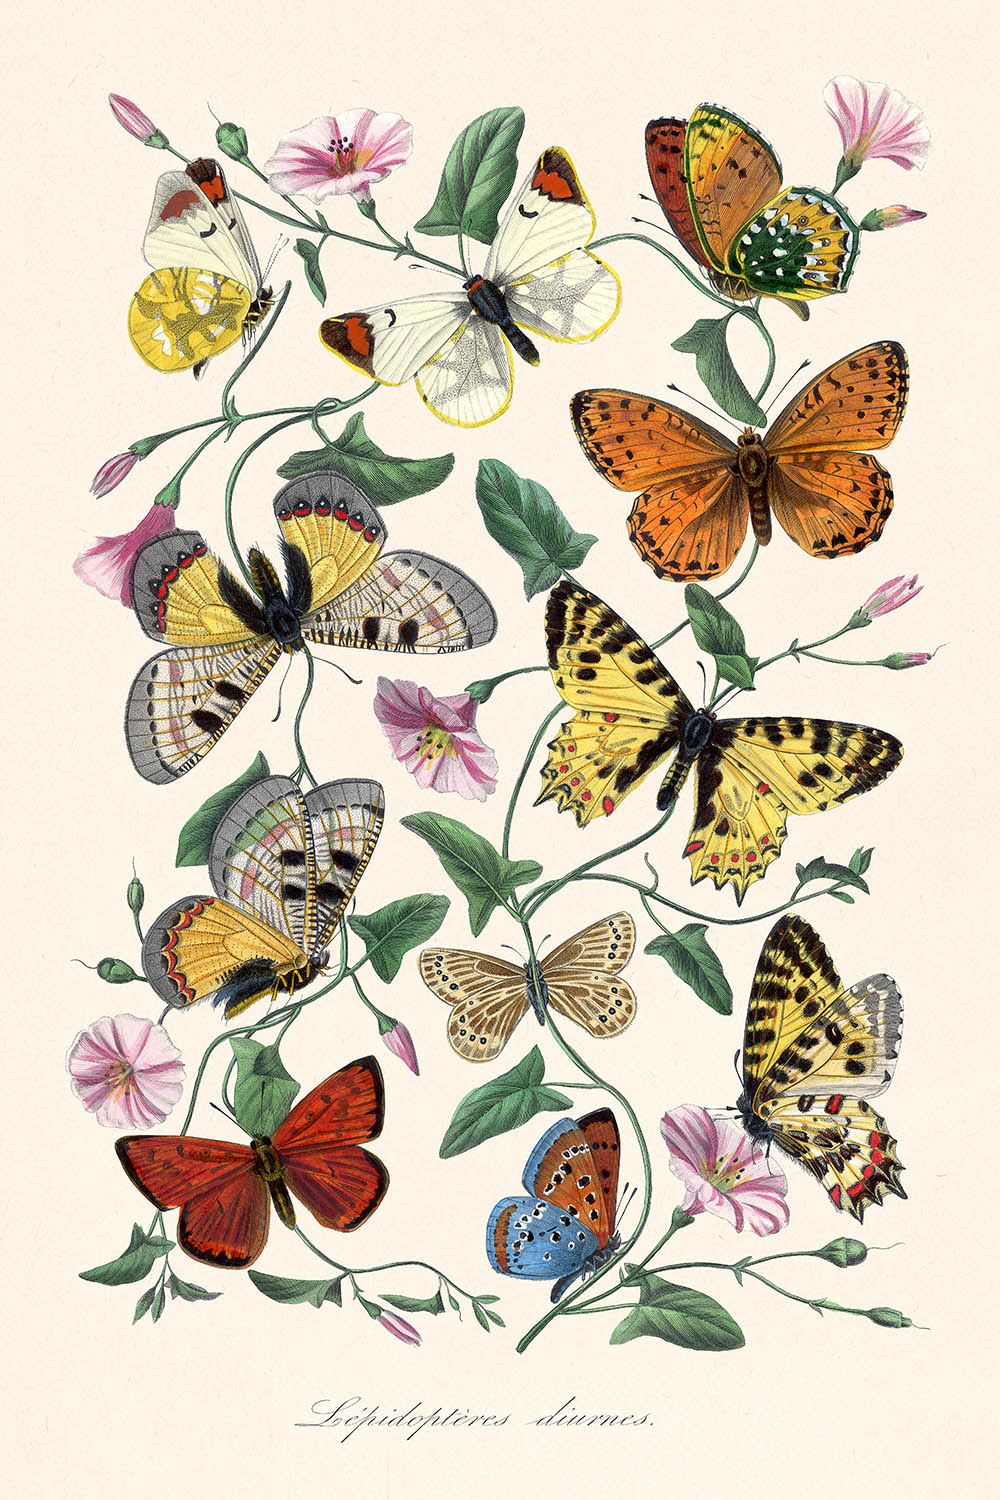 Butterfly and Moth Zoological Illustration by Paul Gervais, 1842